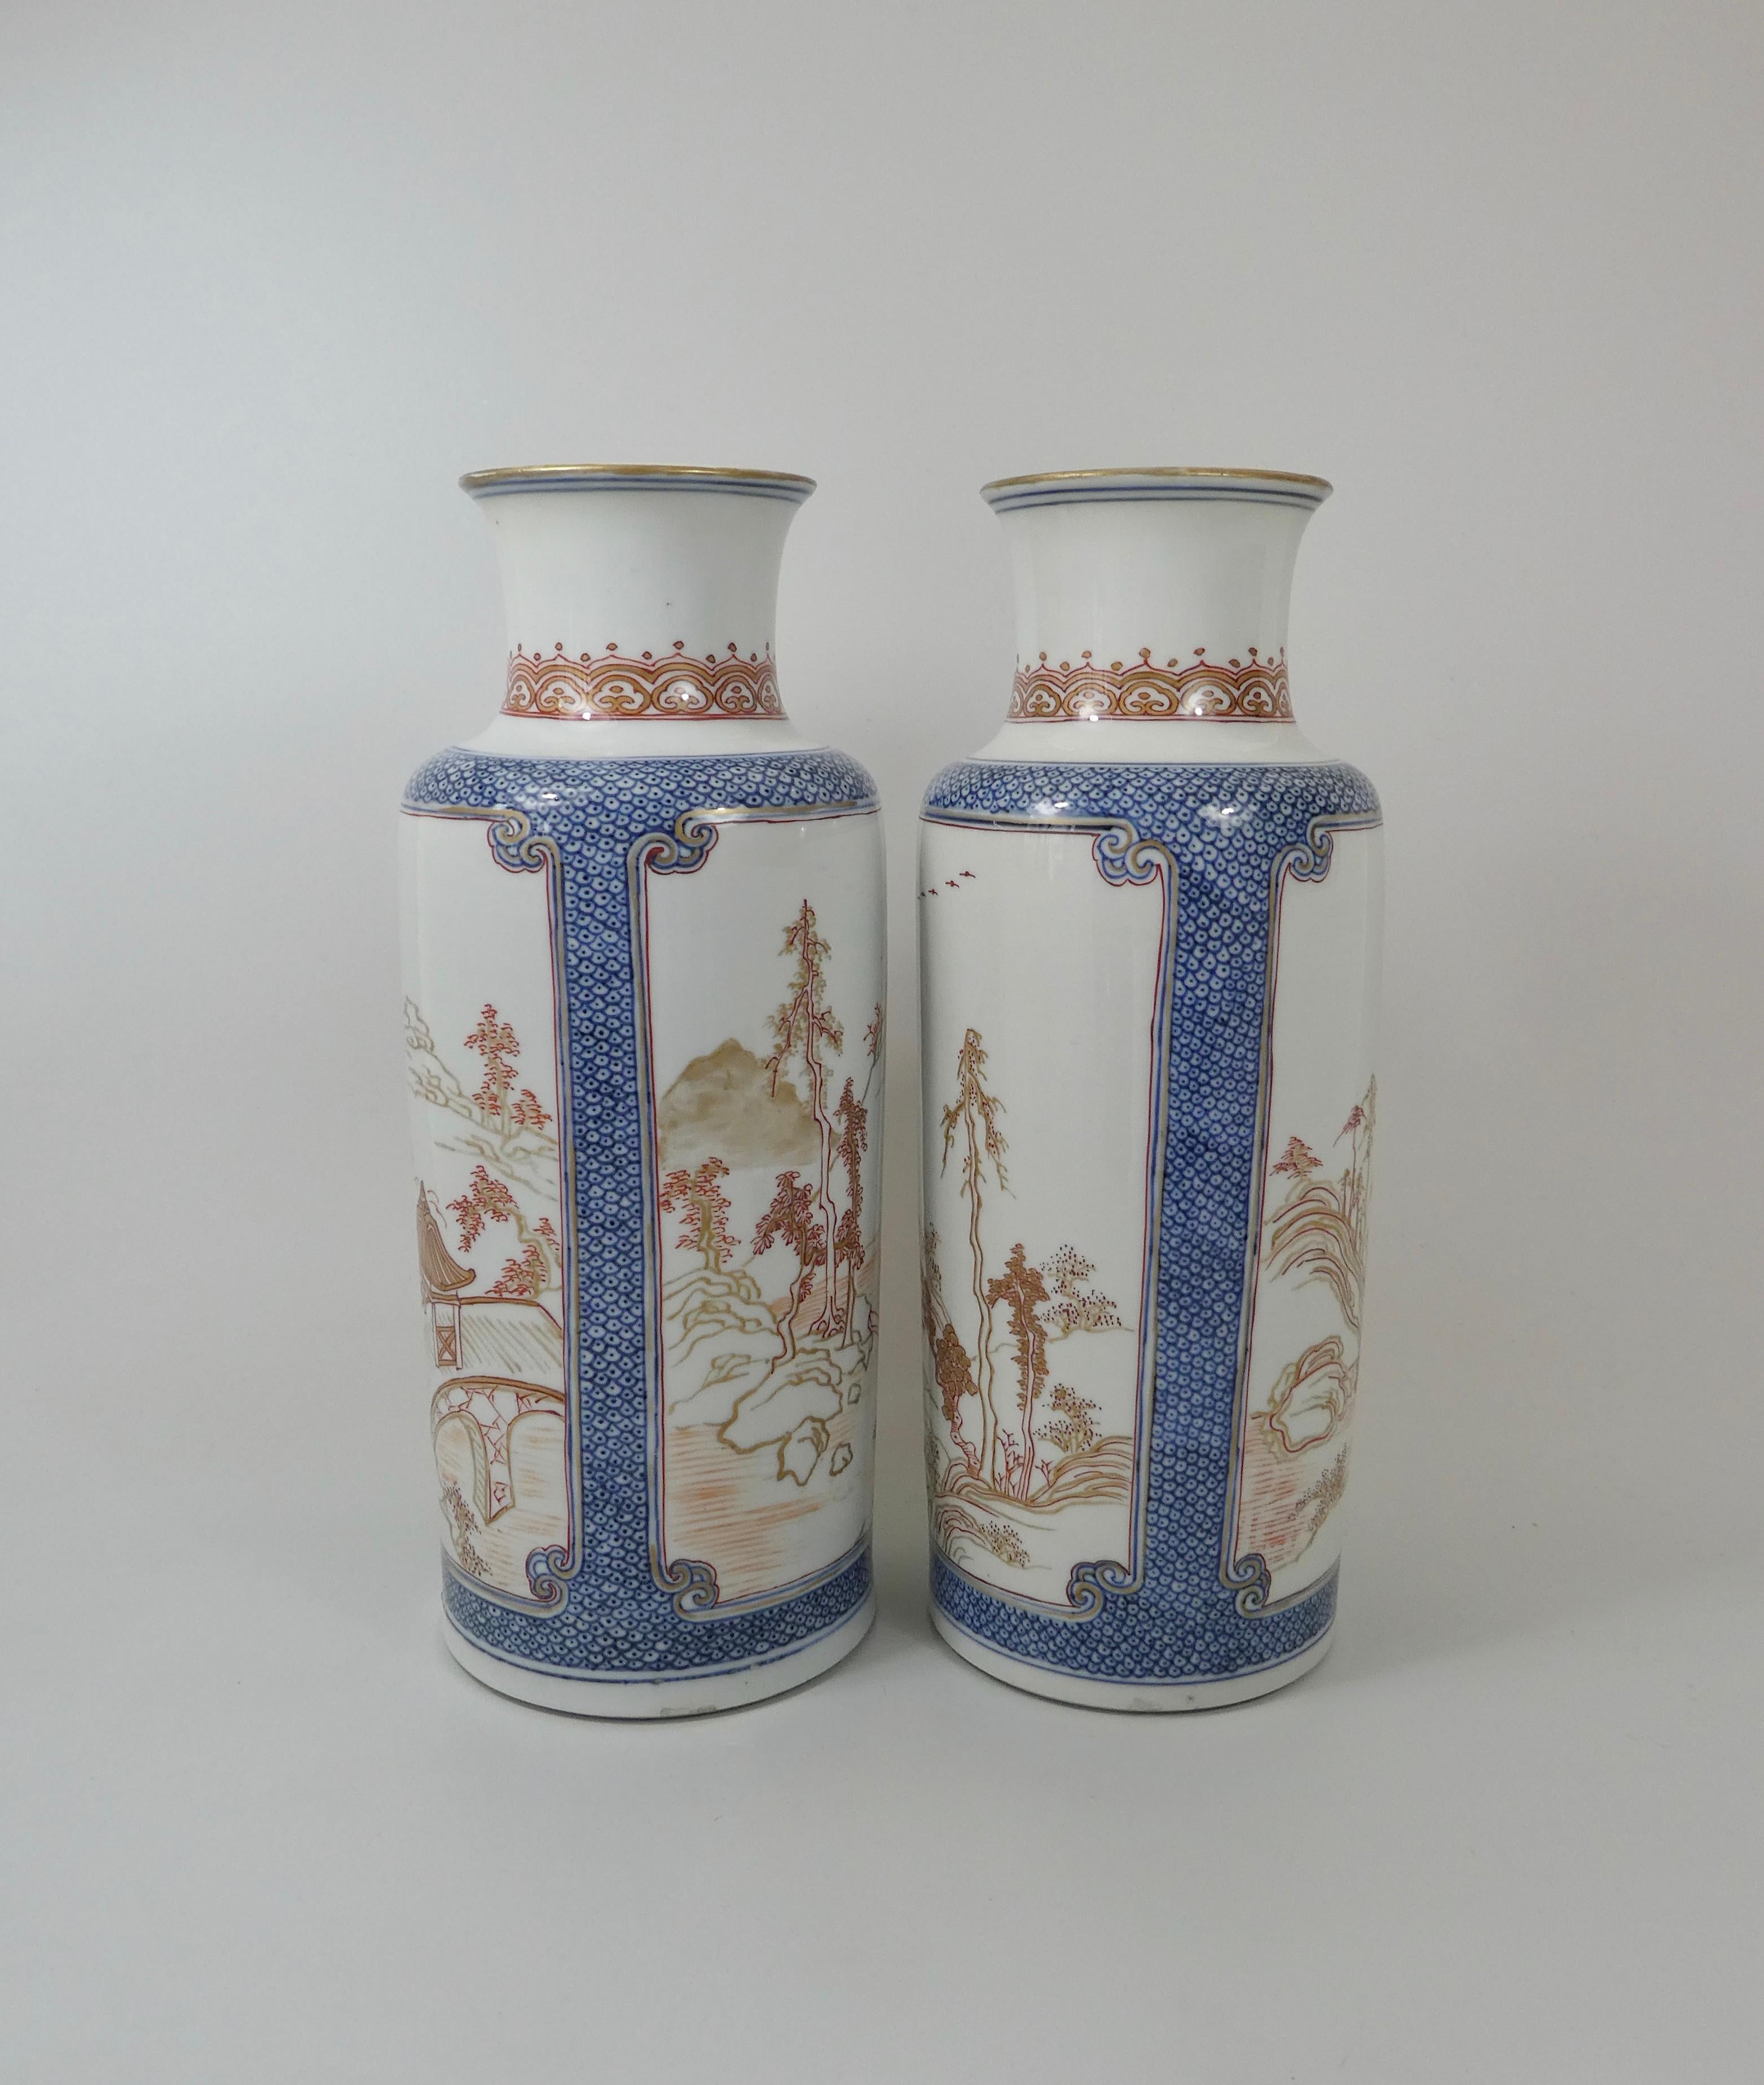 Pair of Chinese Porcelain ‘Rouge de Fer’ Decorated Vases, c. 1700. Kangxi. 9